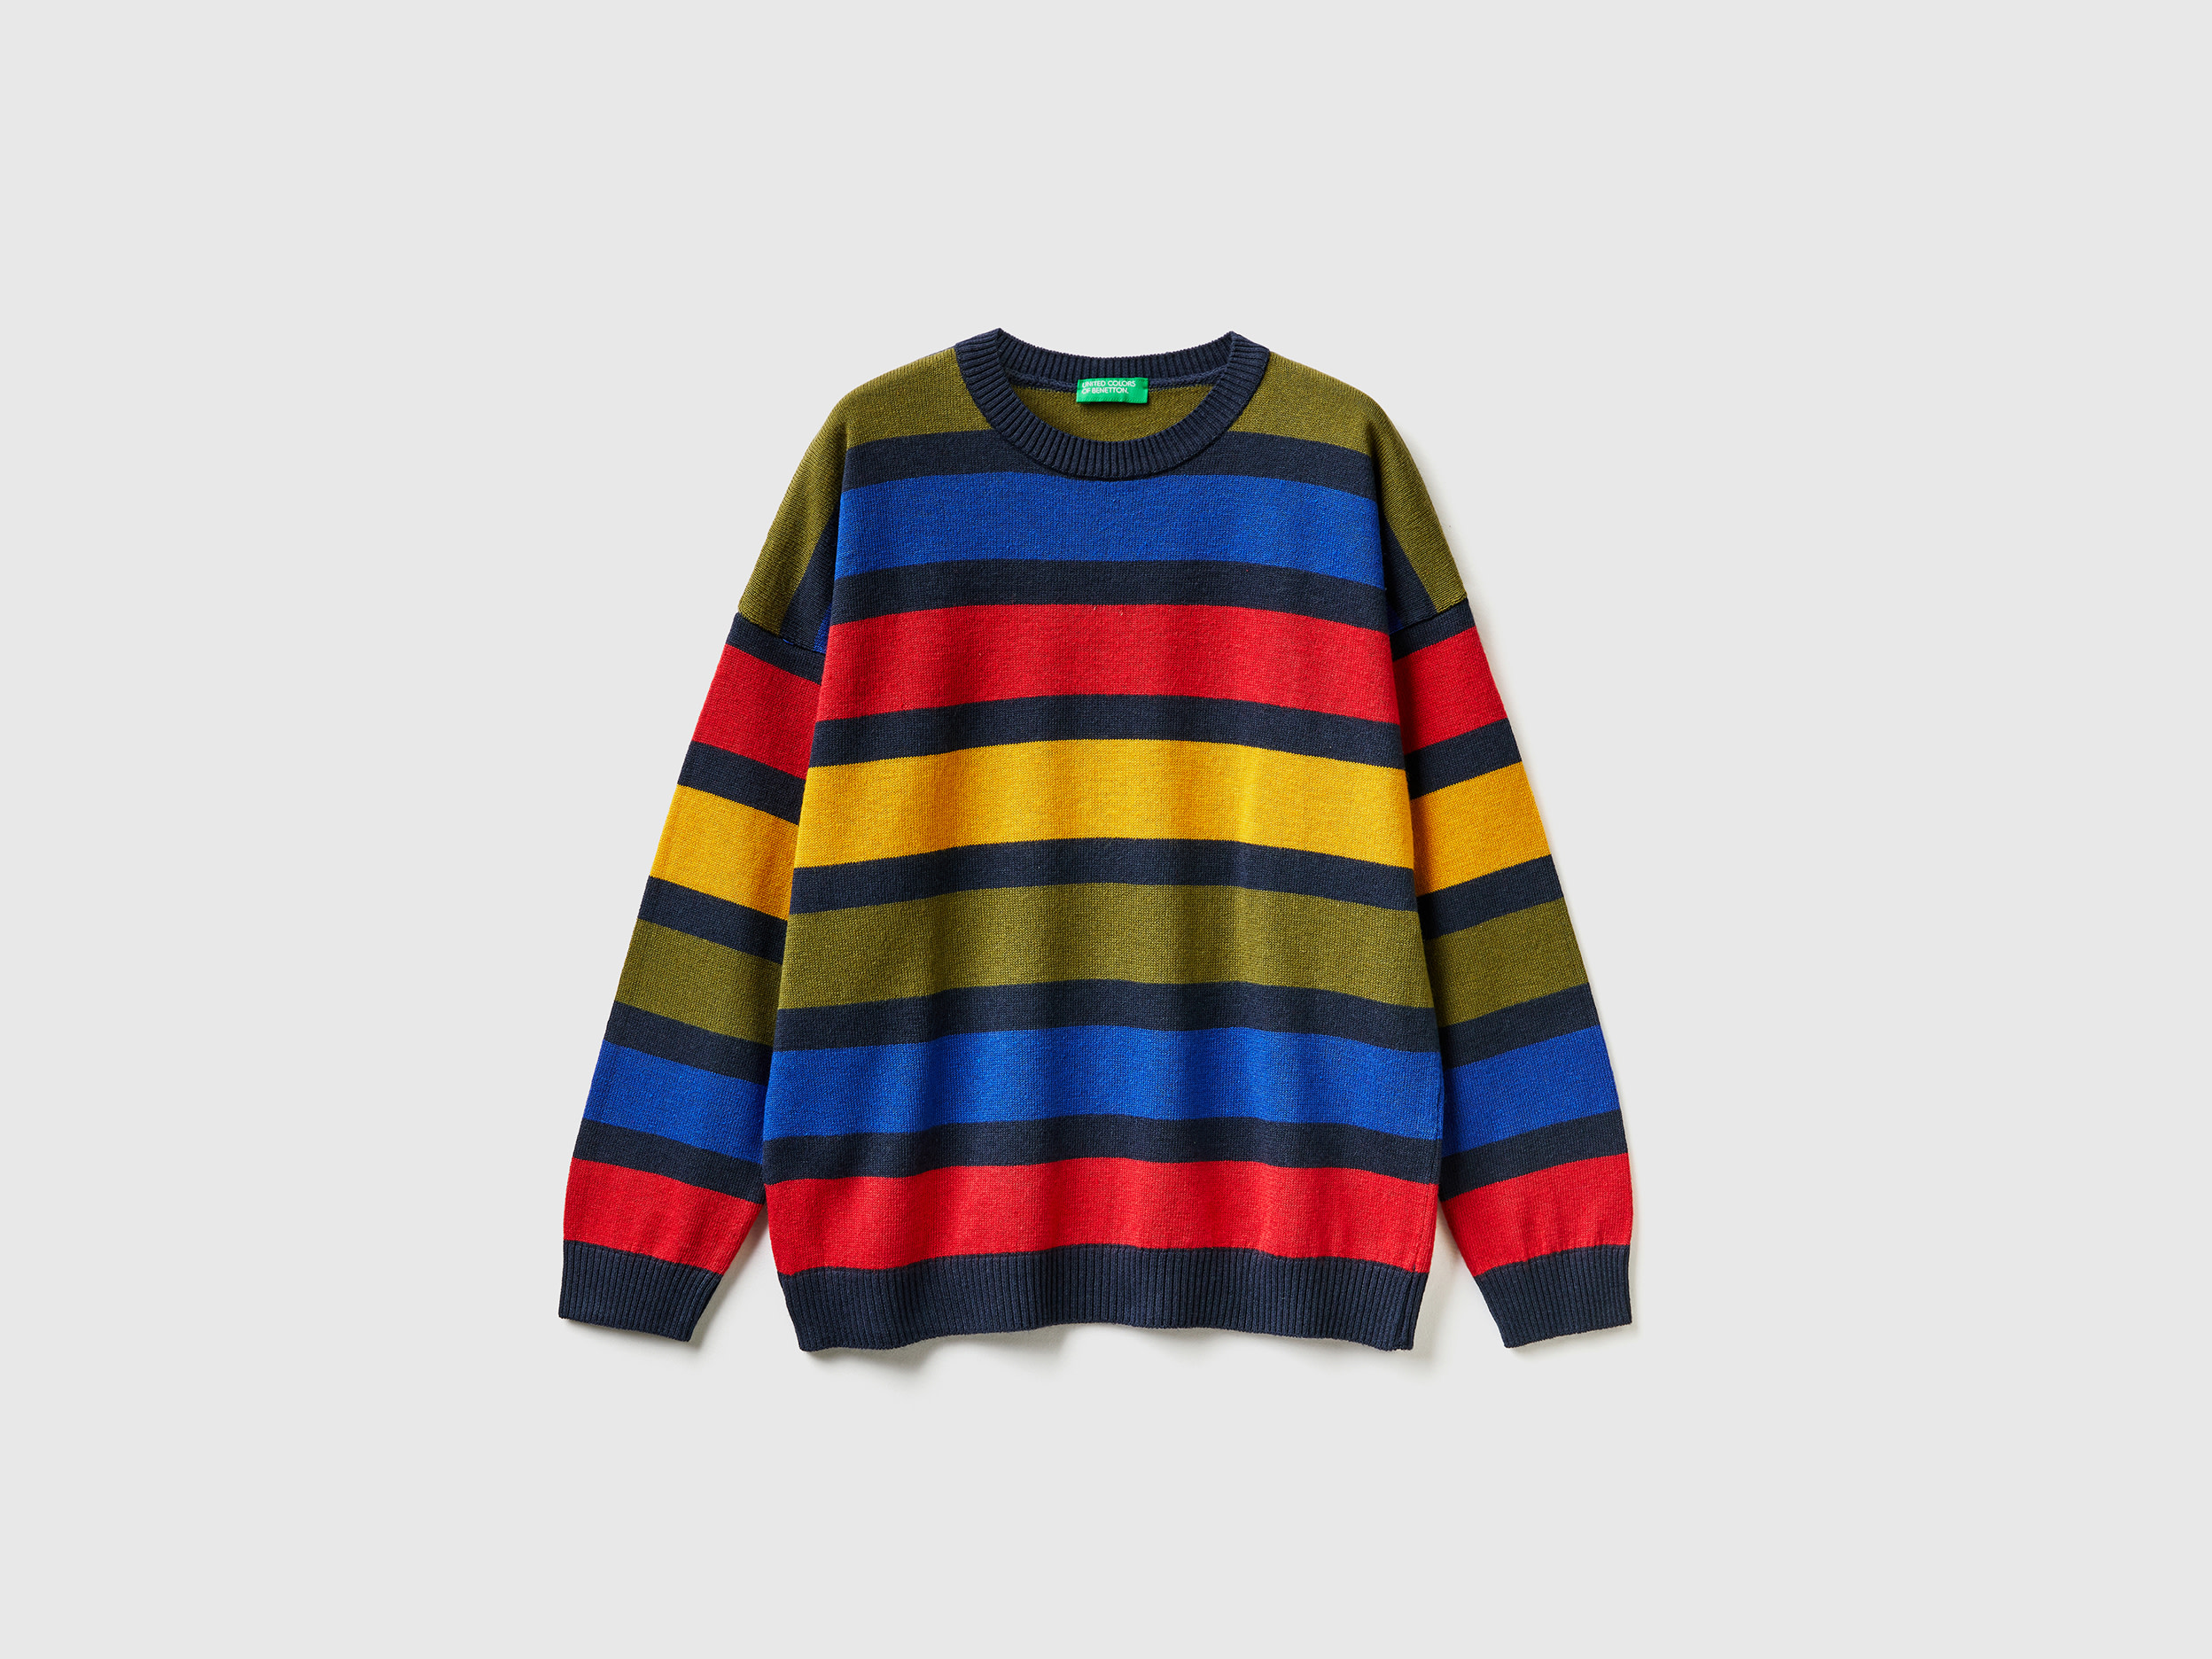 Benetton, Striped Sweater In Wool And Cotton Blend, size S, Multi-color, Kids